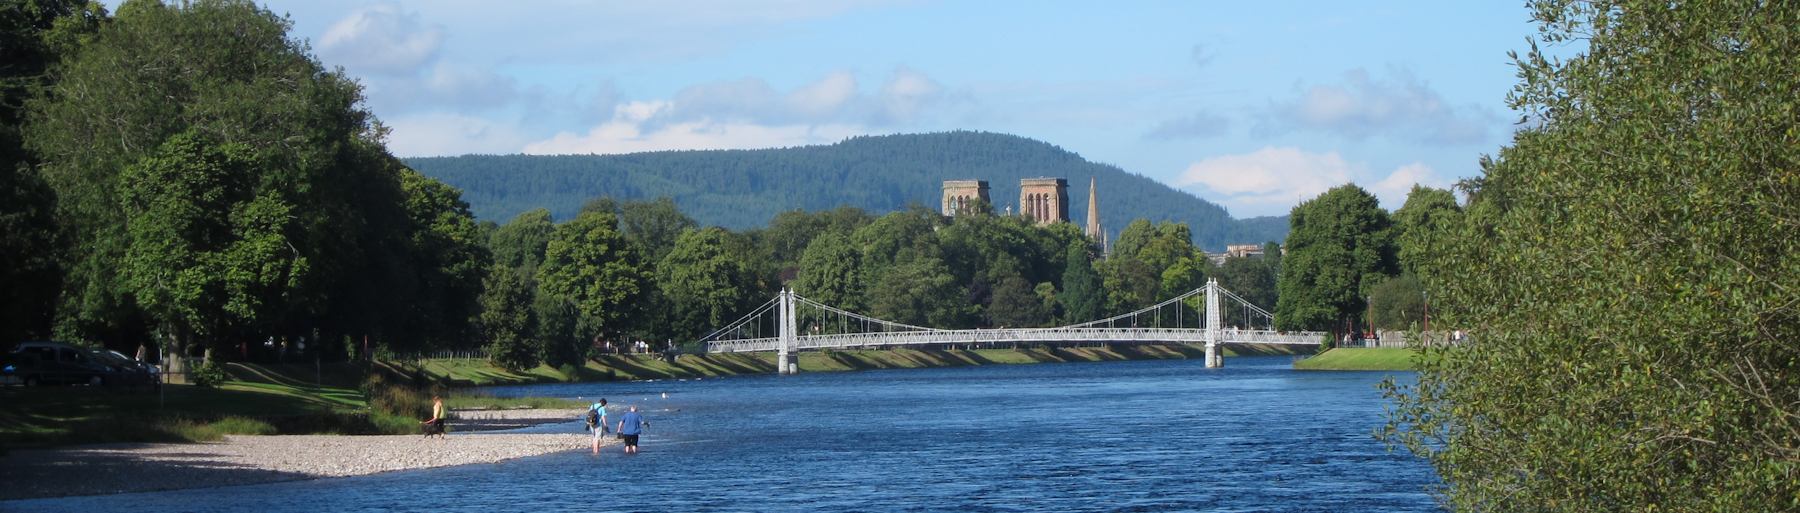 Inverness and the River Ness